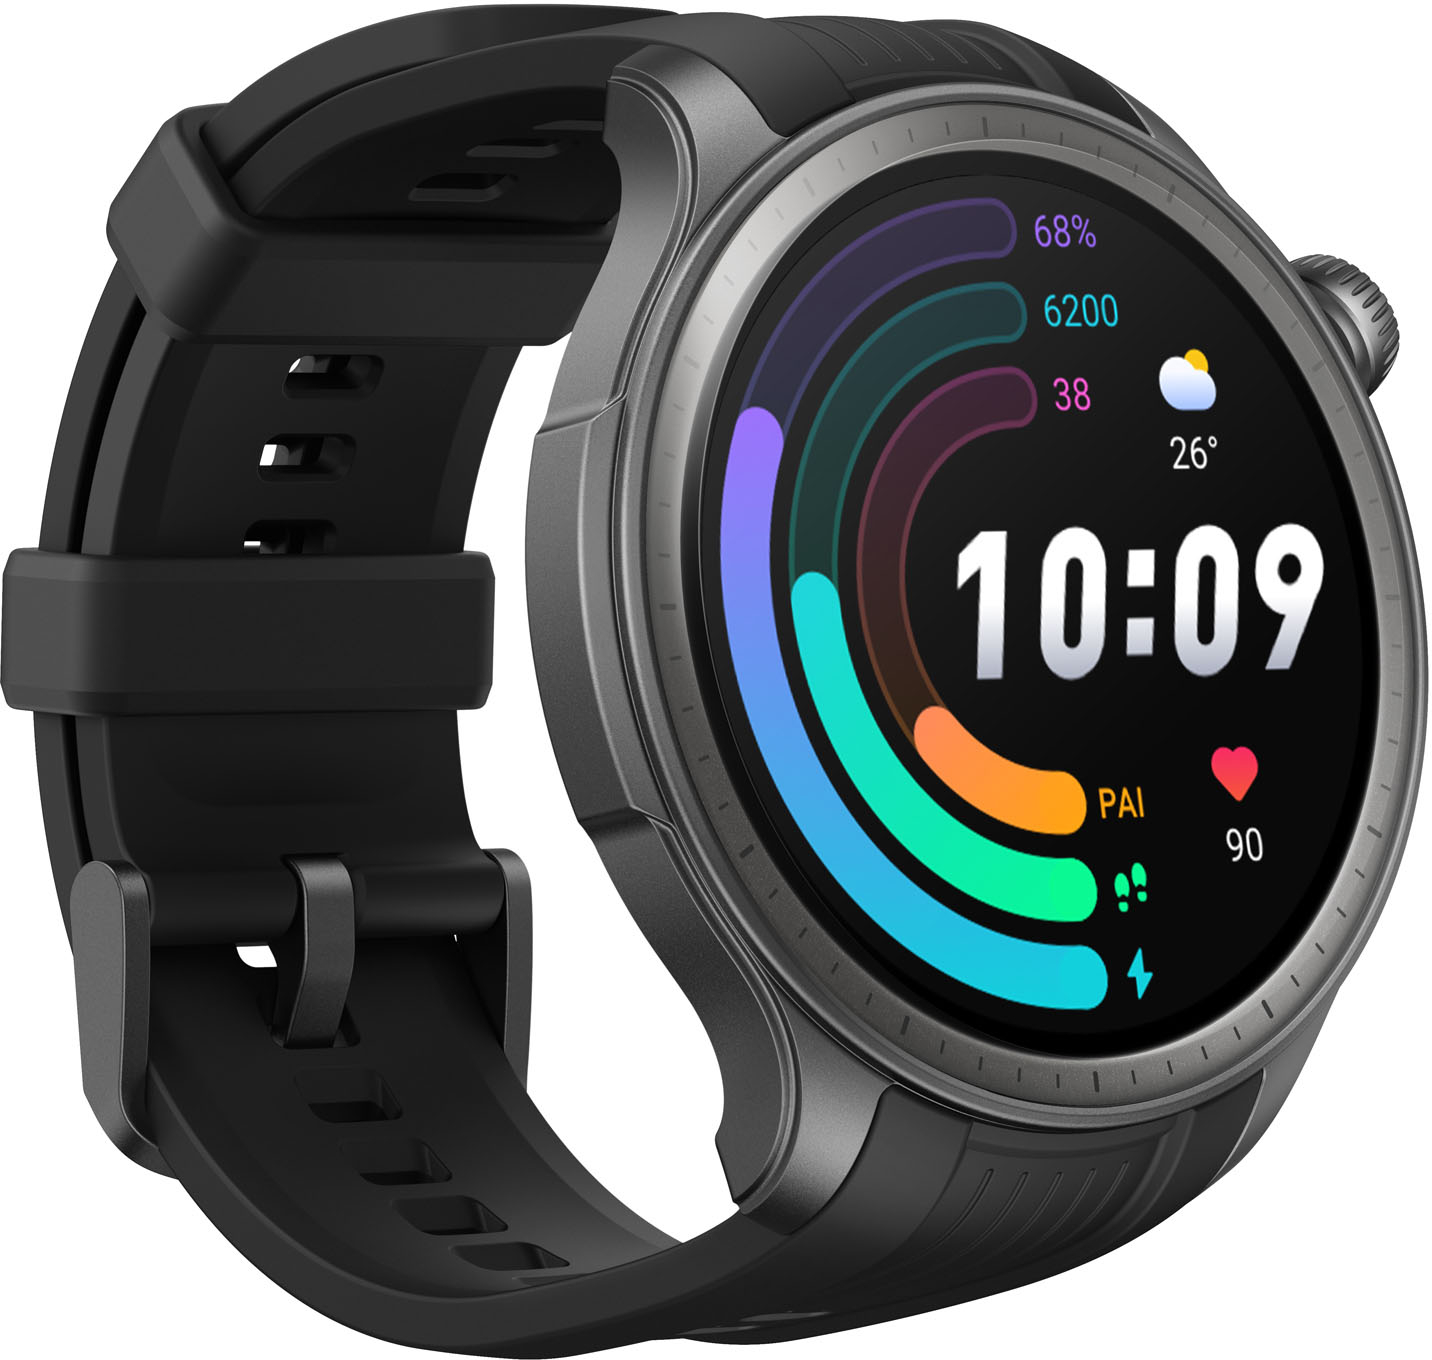 Amazfit Balance: AMOLED display, 46mm body, water protection and AI  features to track health metrics